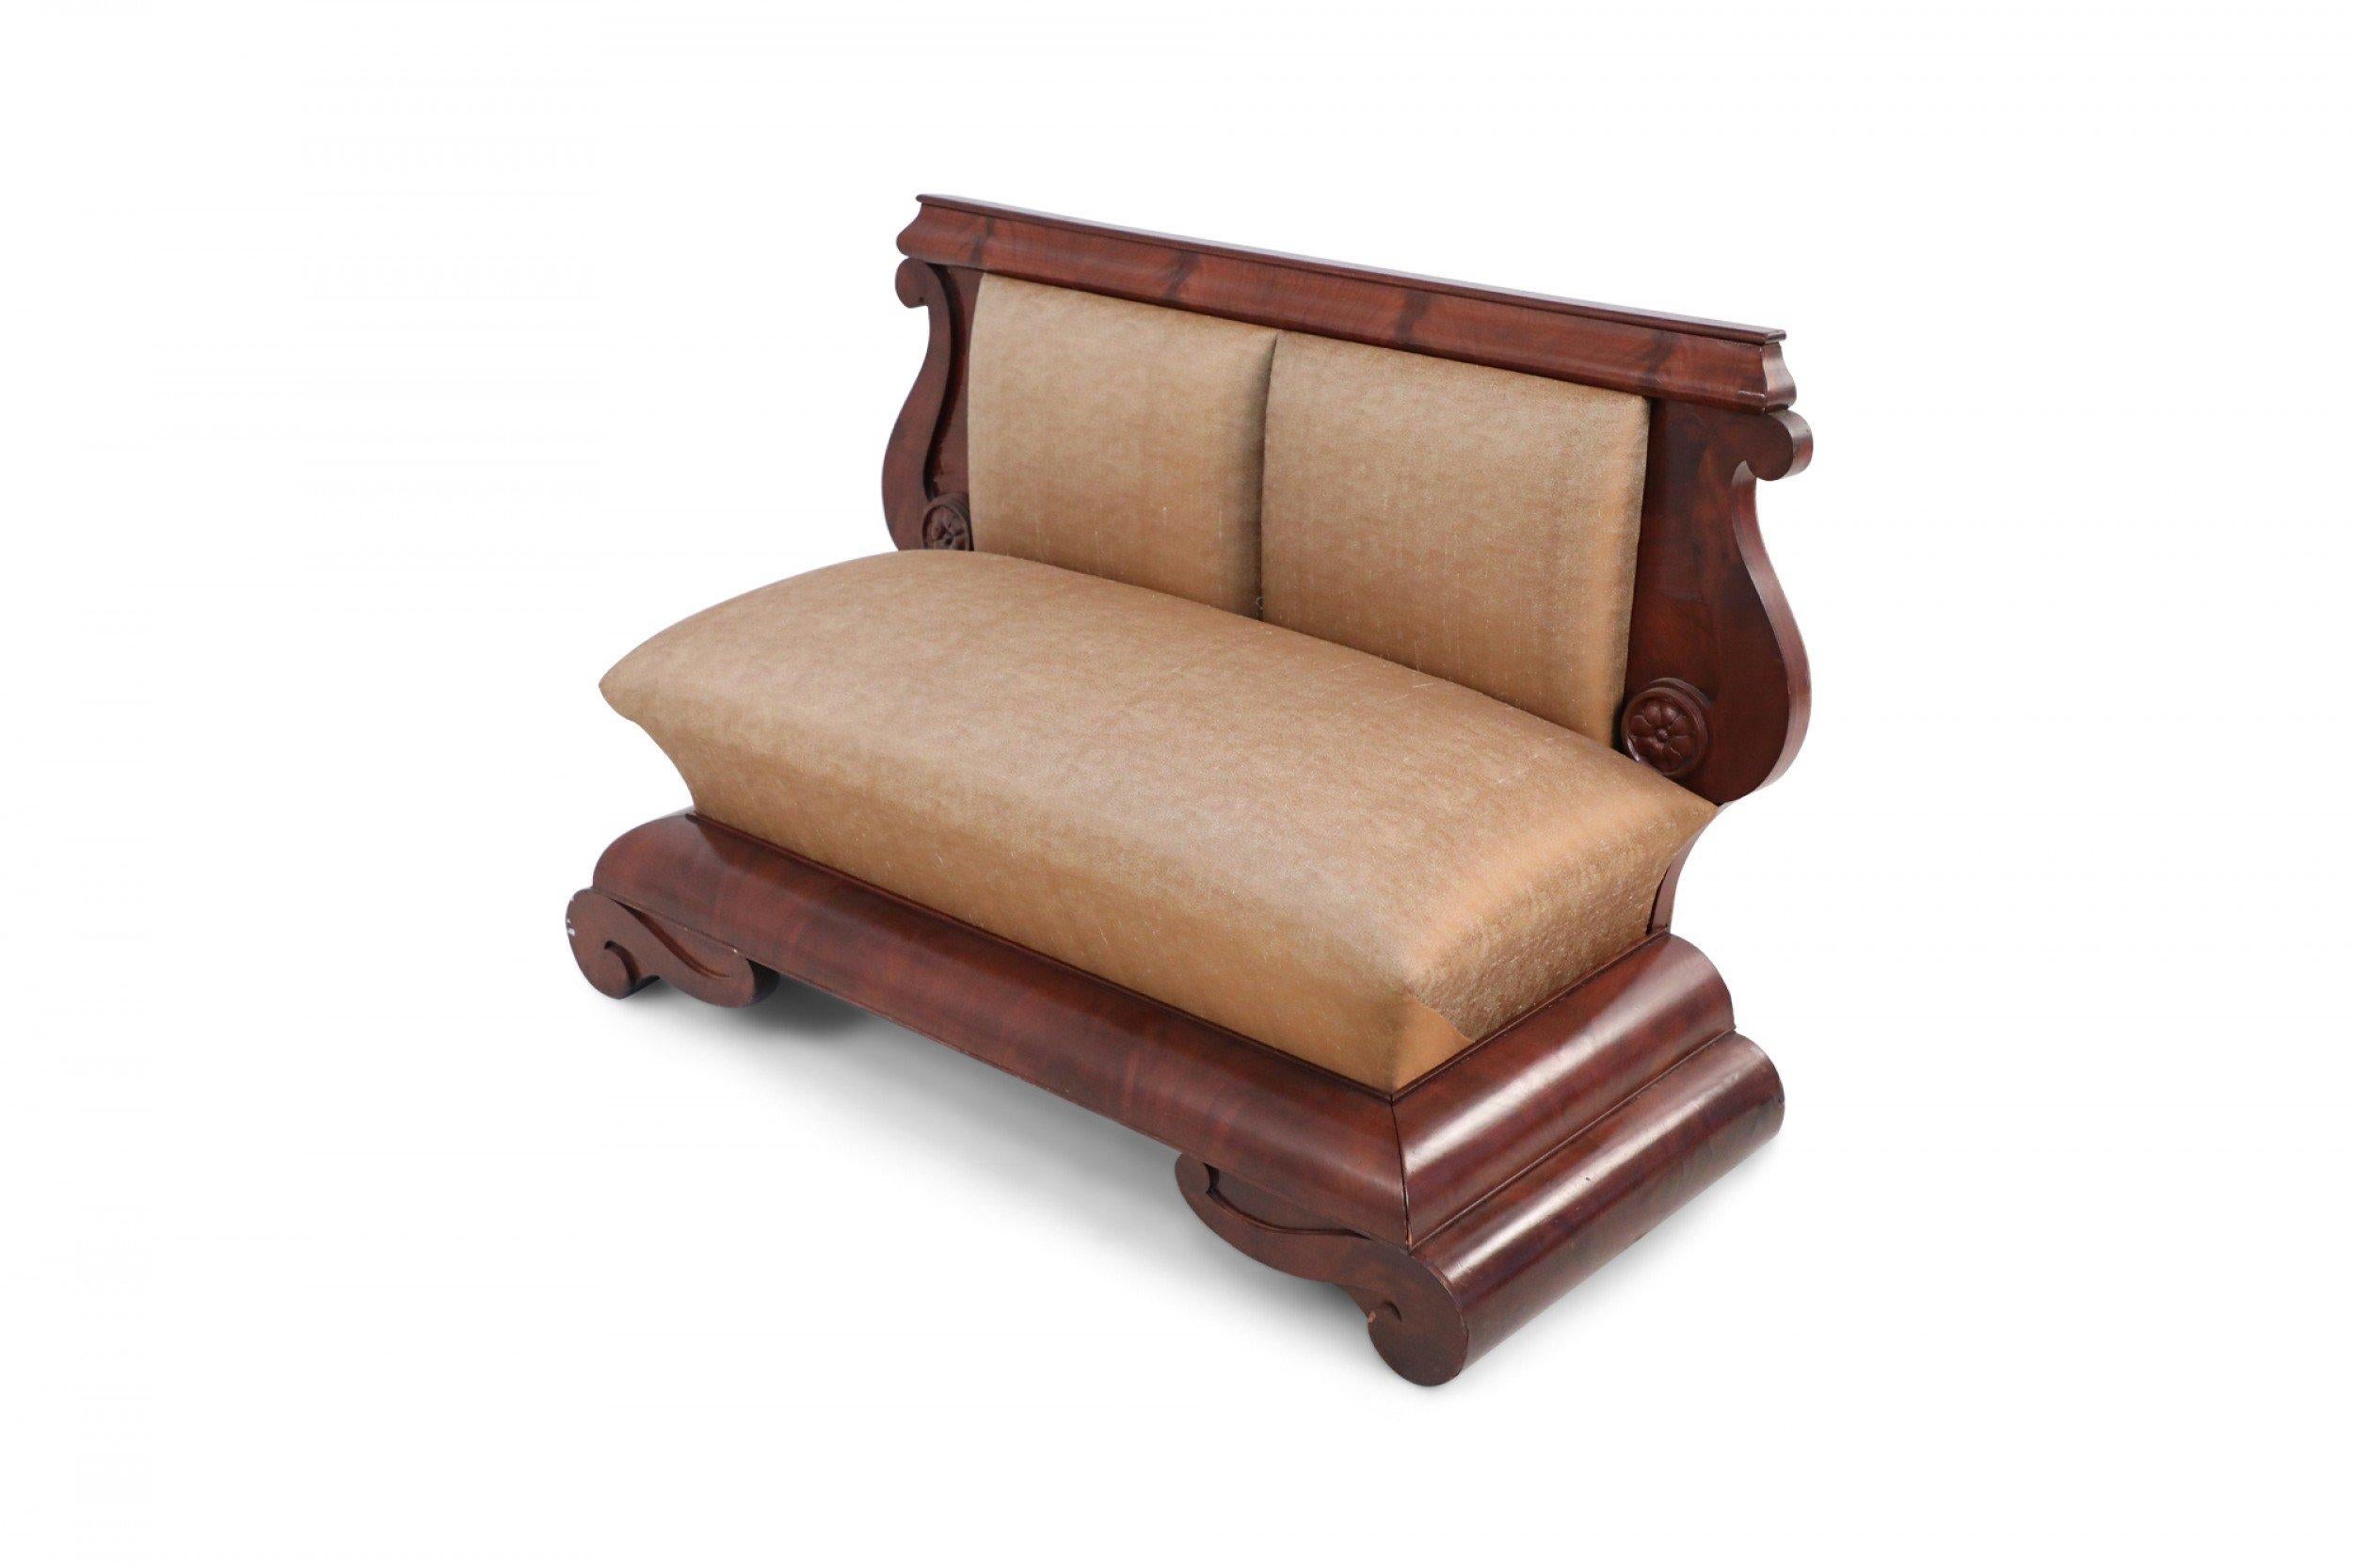 Pair of American Empire (circa 1840) window seats with crotch mahogany veneer frames, lyre-shaped backs, and beige satin upholstered seat & back resting on large tiered base.